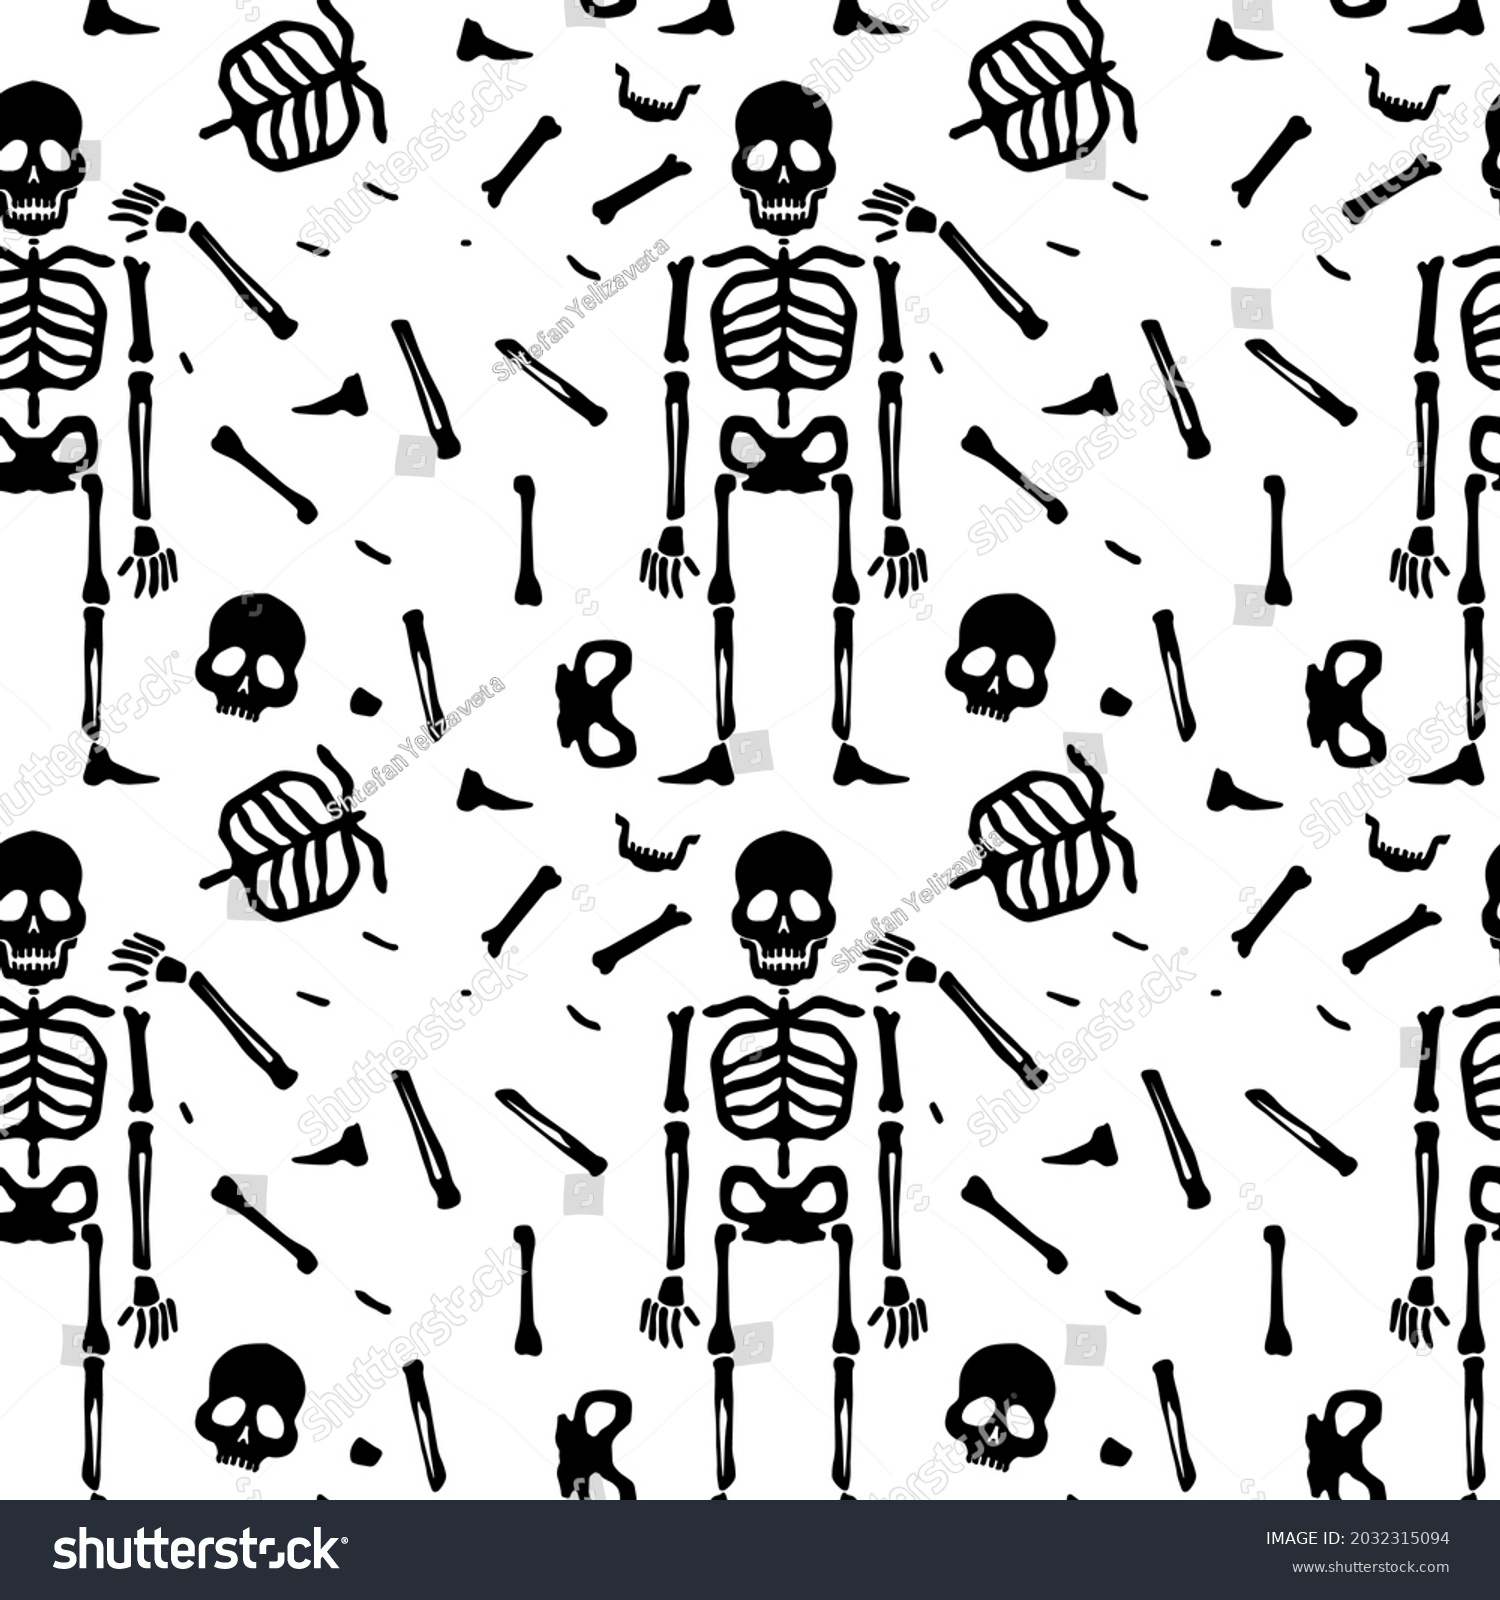 SVG of Human man skeleton anatomy cartoon style. Vector isolated flat illustration of skull and bones.Seamless pattern. Halloween cutting svg file for design svg